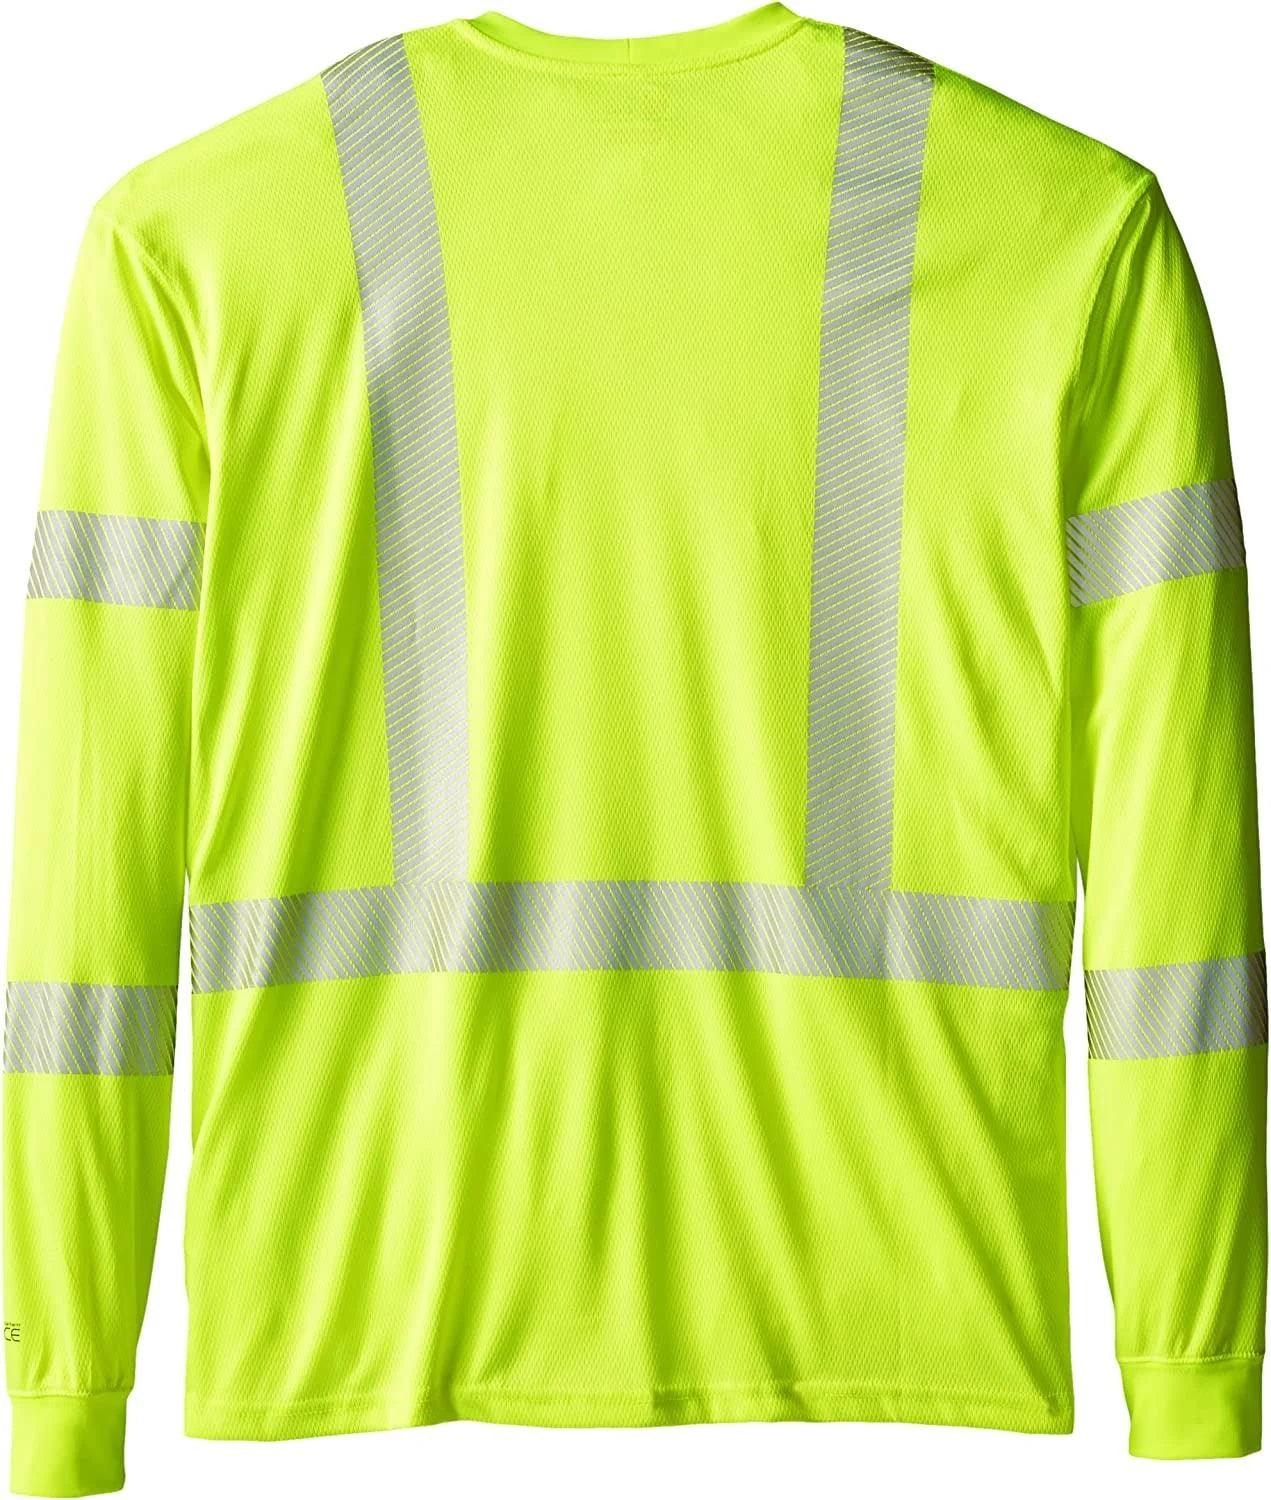 Class 3 High Visibility Force Long Sleeve T-Shirt - Brite Lime